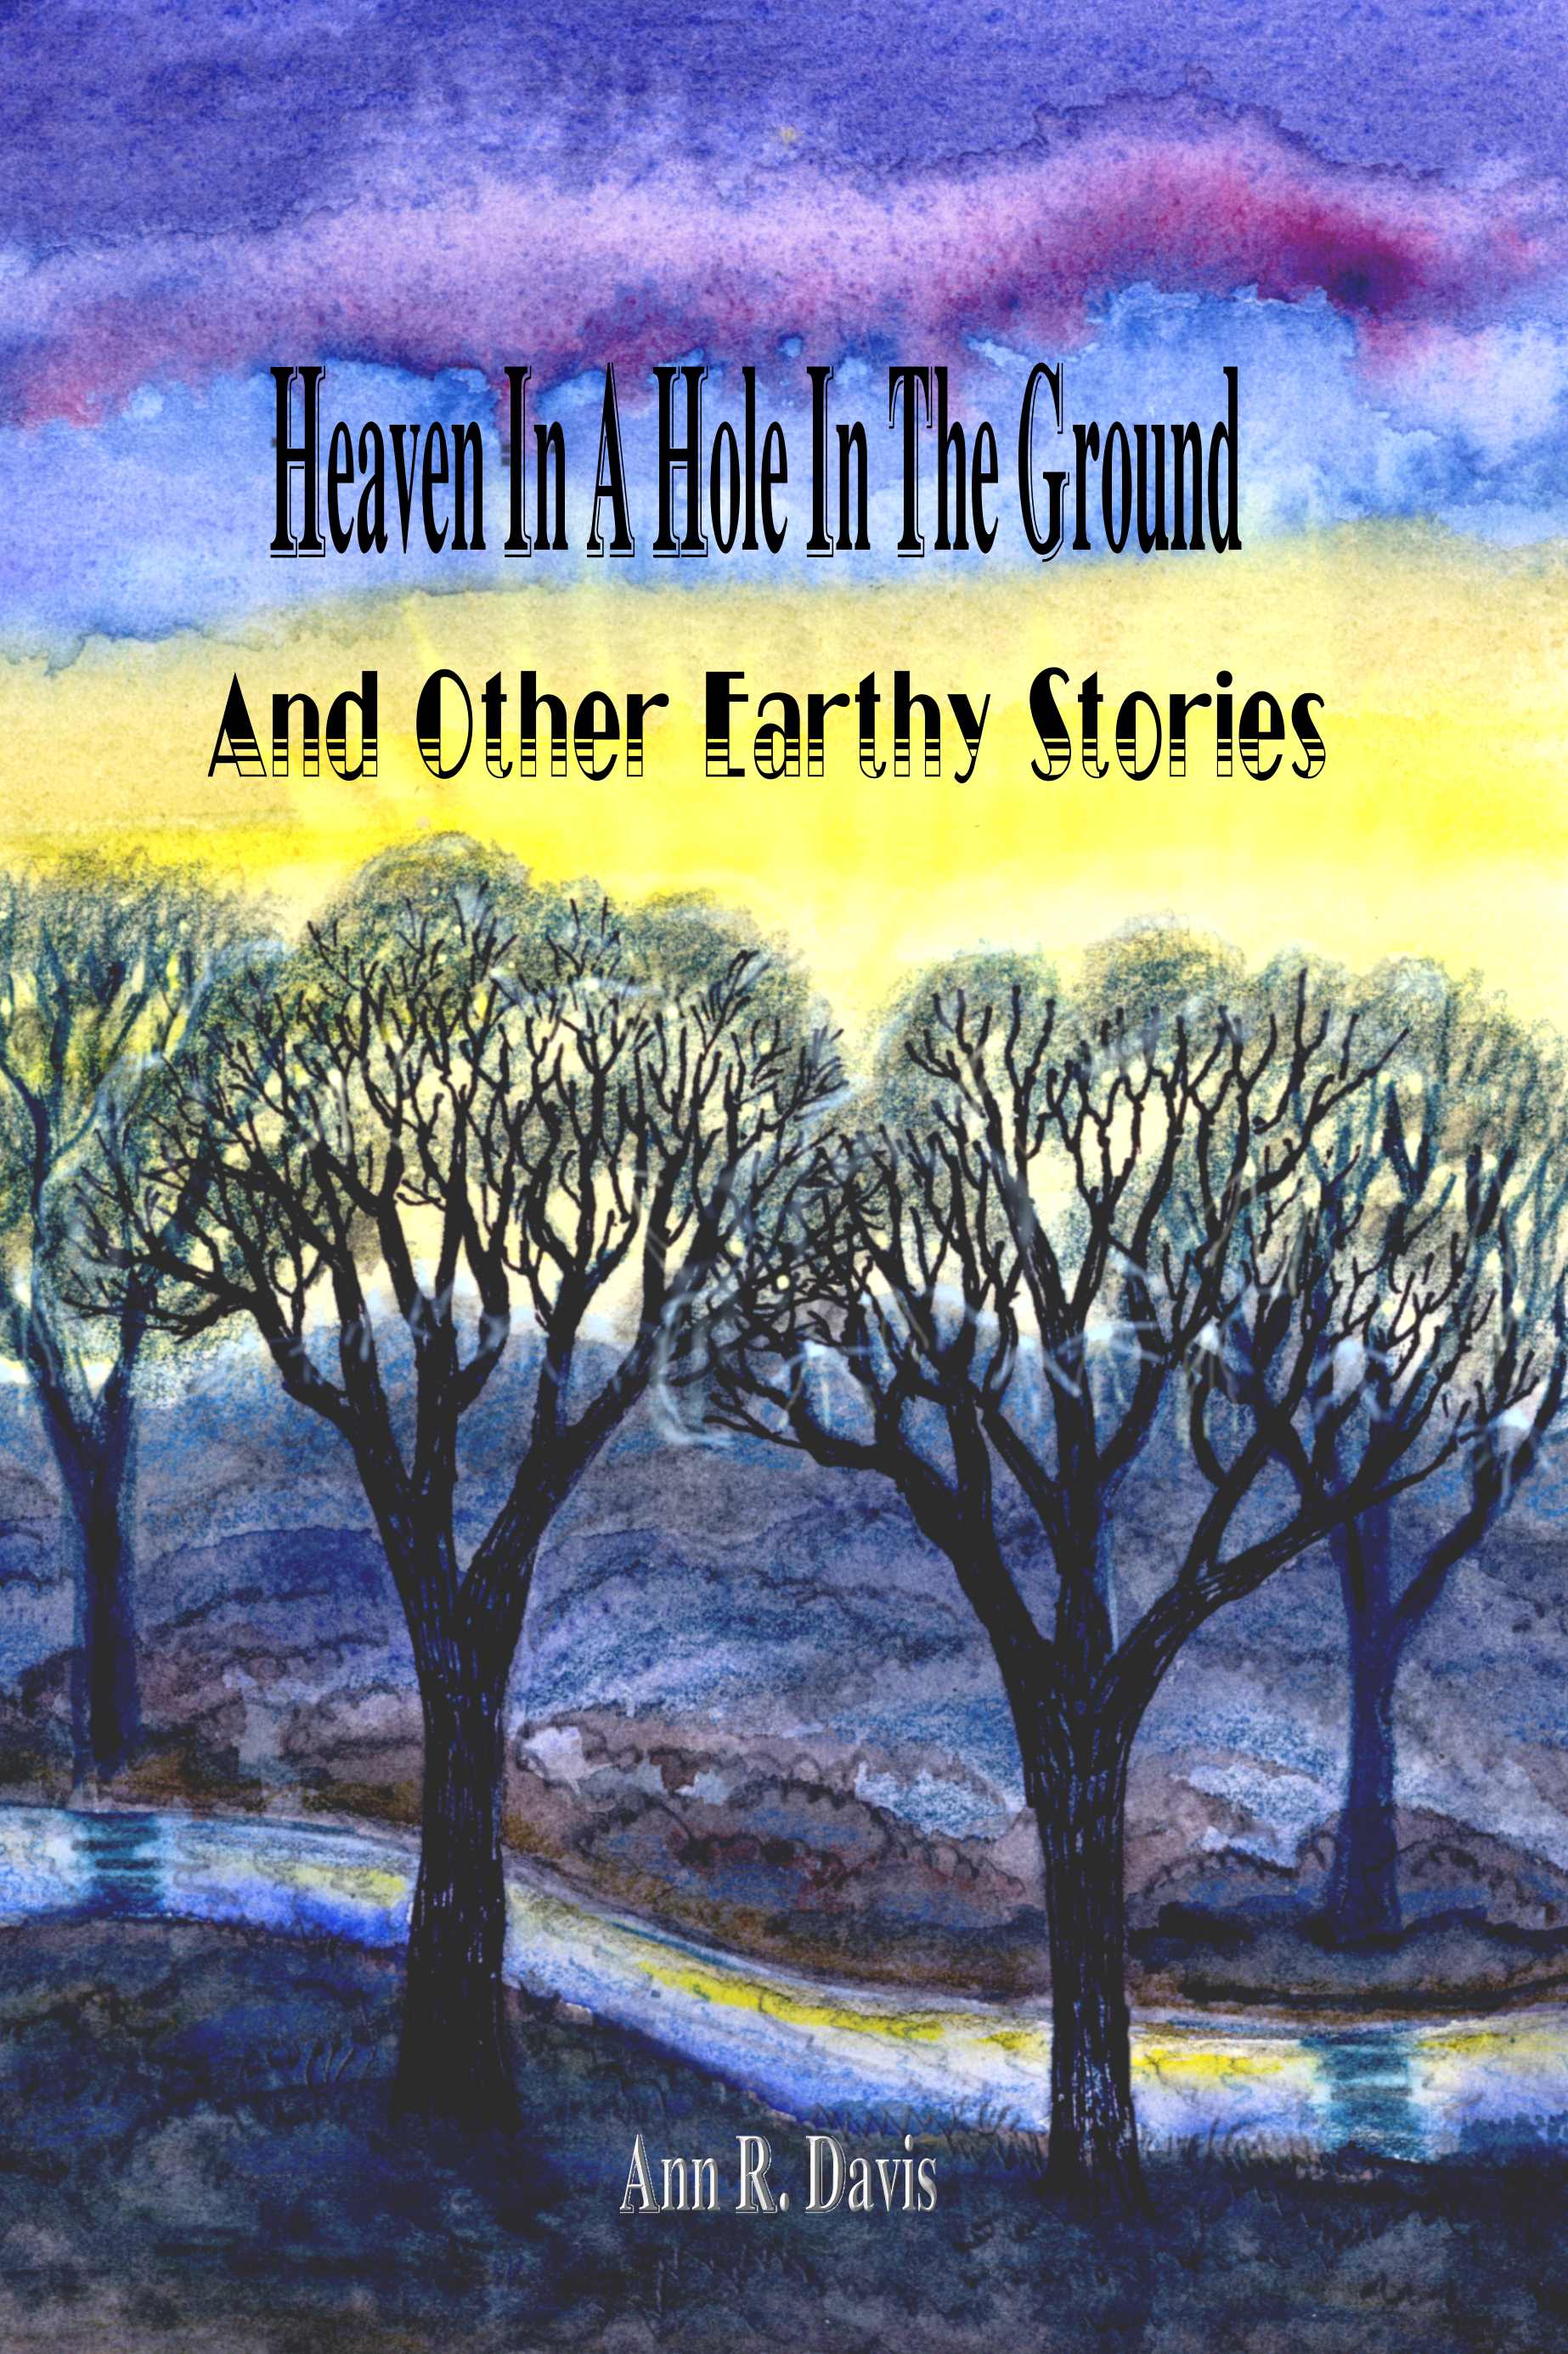 Heaven in a Hole in the Ground and Other Earthy Stories